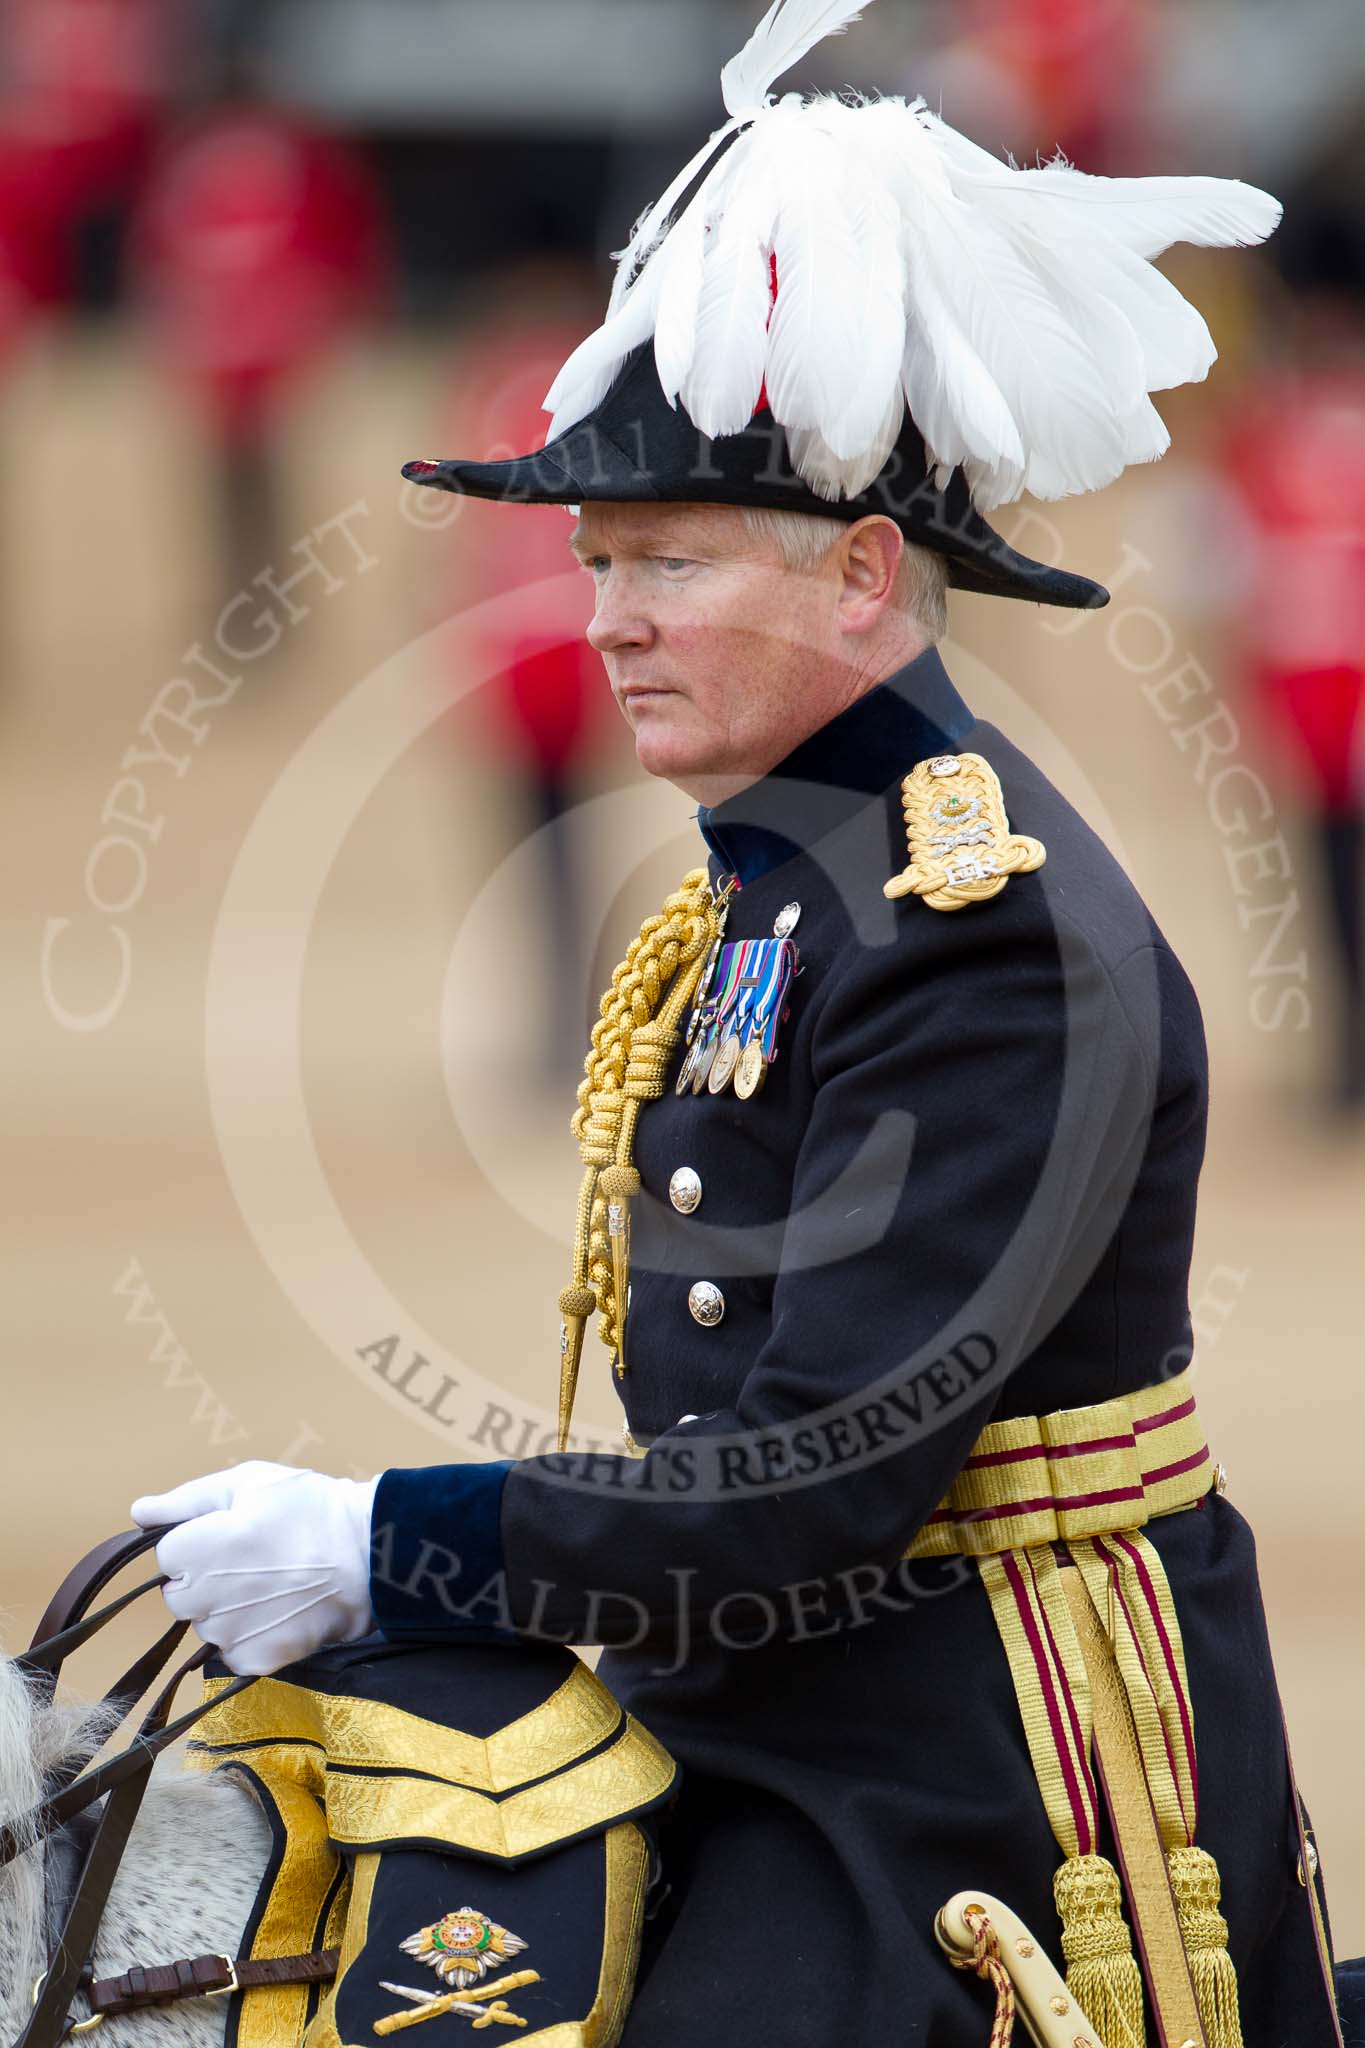 The Major General's Review 2011: Major General William Cubitt CBE, the Major General Commanding the Household Division. The "Major General's Review" is his review..
Horse Guards Parade, Westminster,
London SW1,
Greater London,
United Kingdom,
on 28 May 2011 at 11:01, image #110